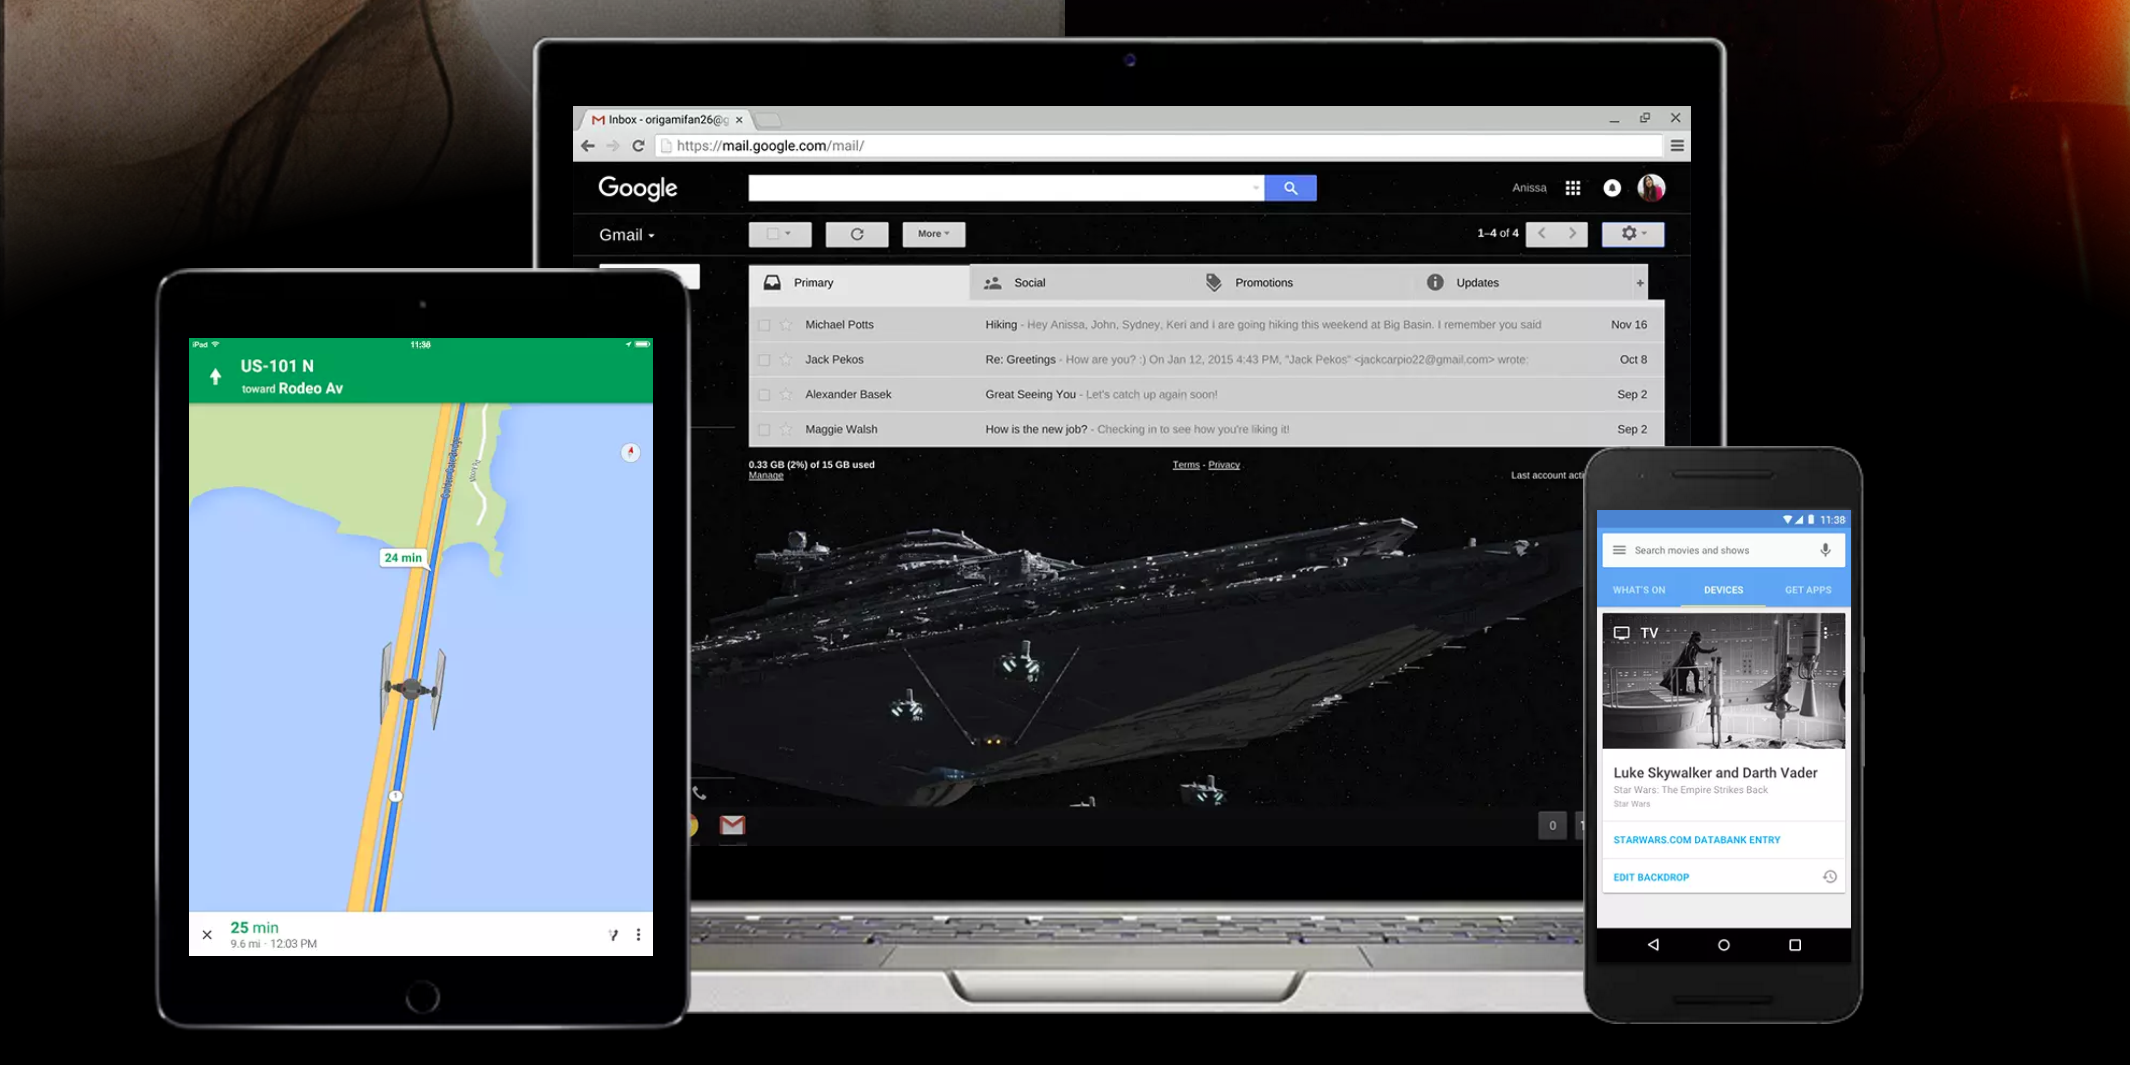 Google Lets You Re-Skin Its Apps Using Light Or Dark Side Star Wars Themes